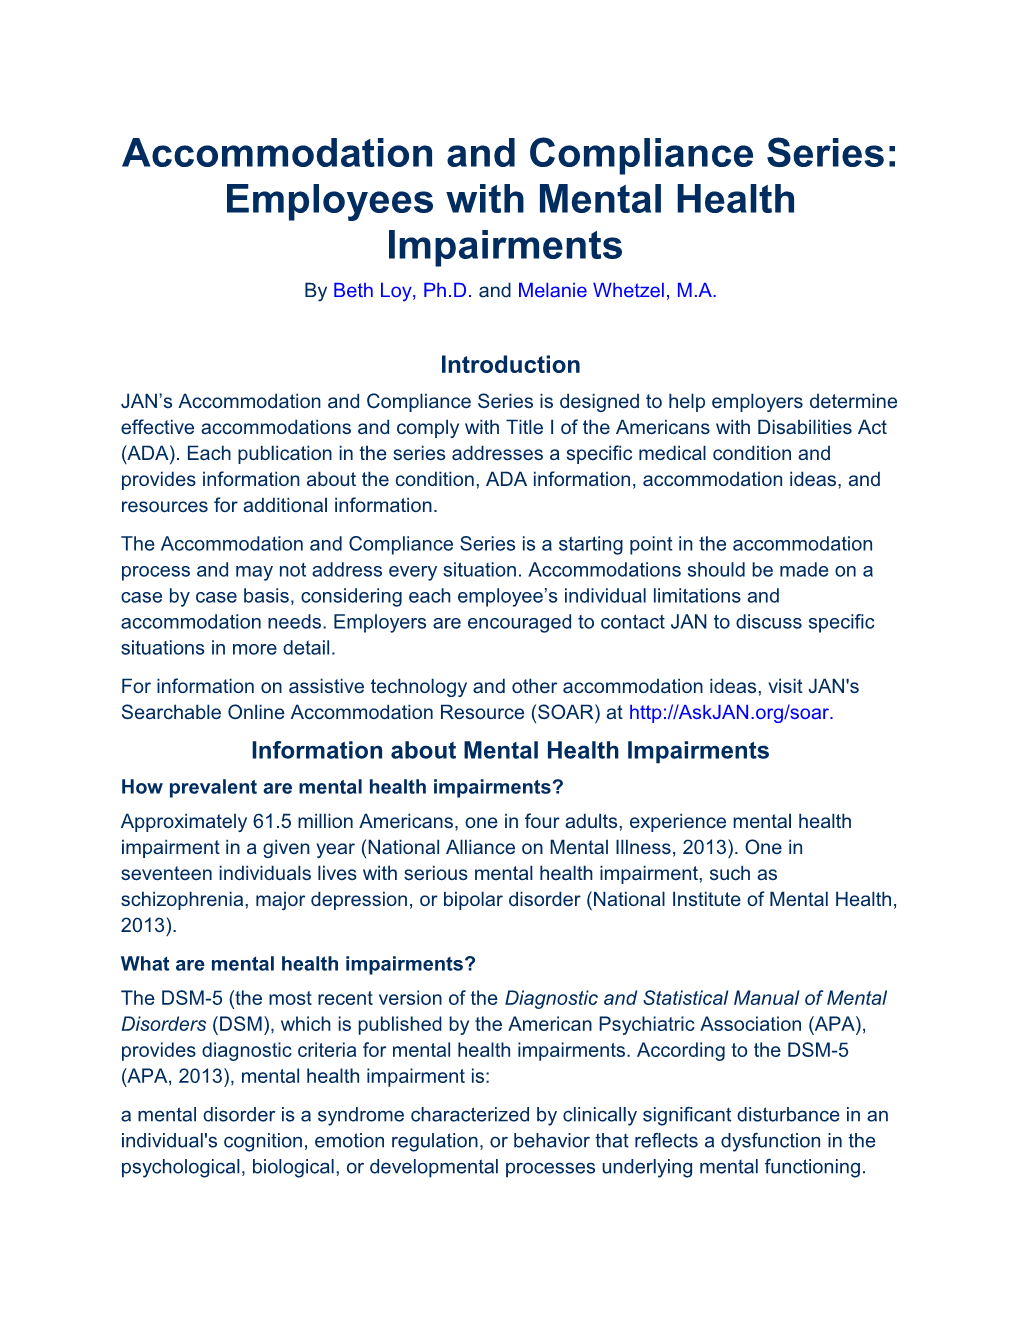 Accommodation and Compliance Series: Employees with Mental Health Impairments